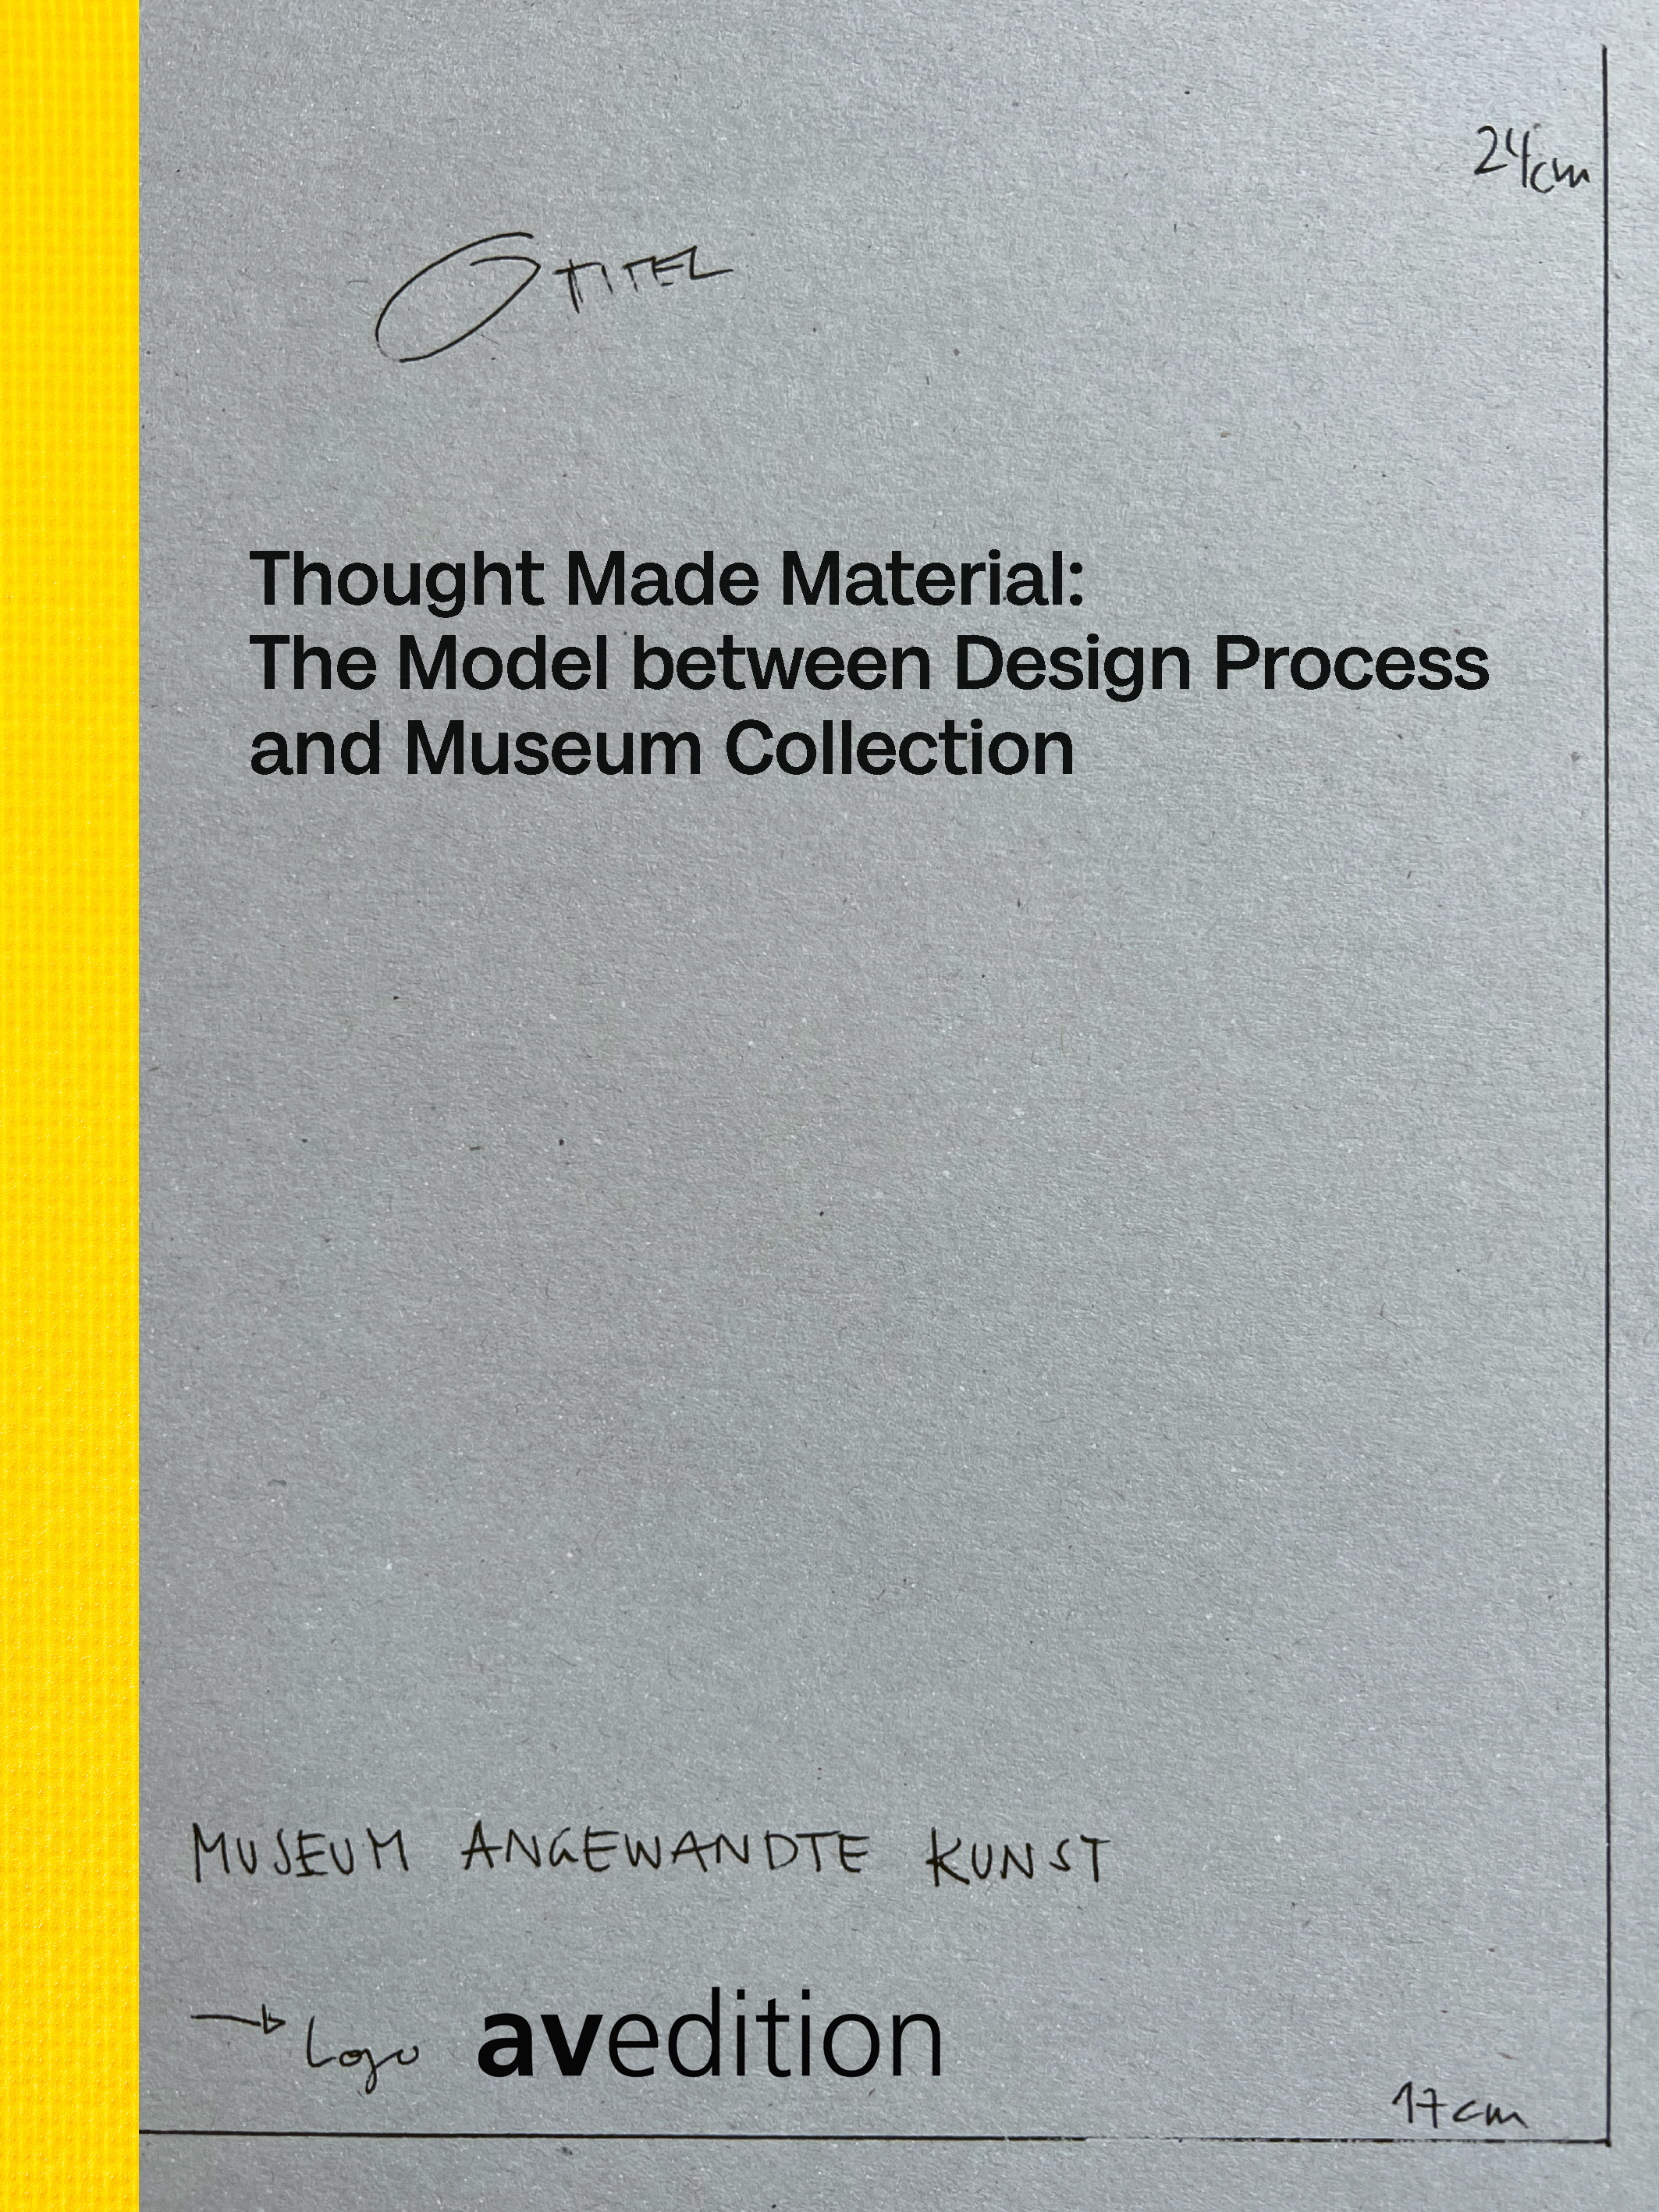 Thought Made Material: The Model between Design Process and Museum Collection